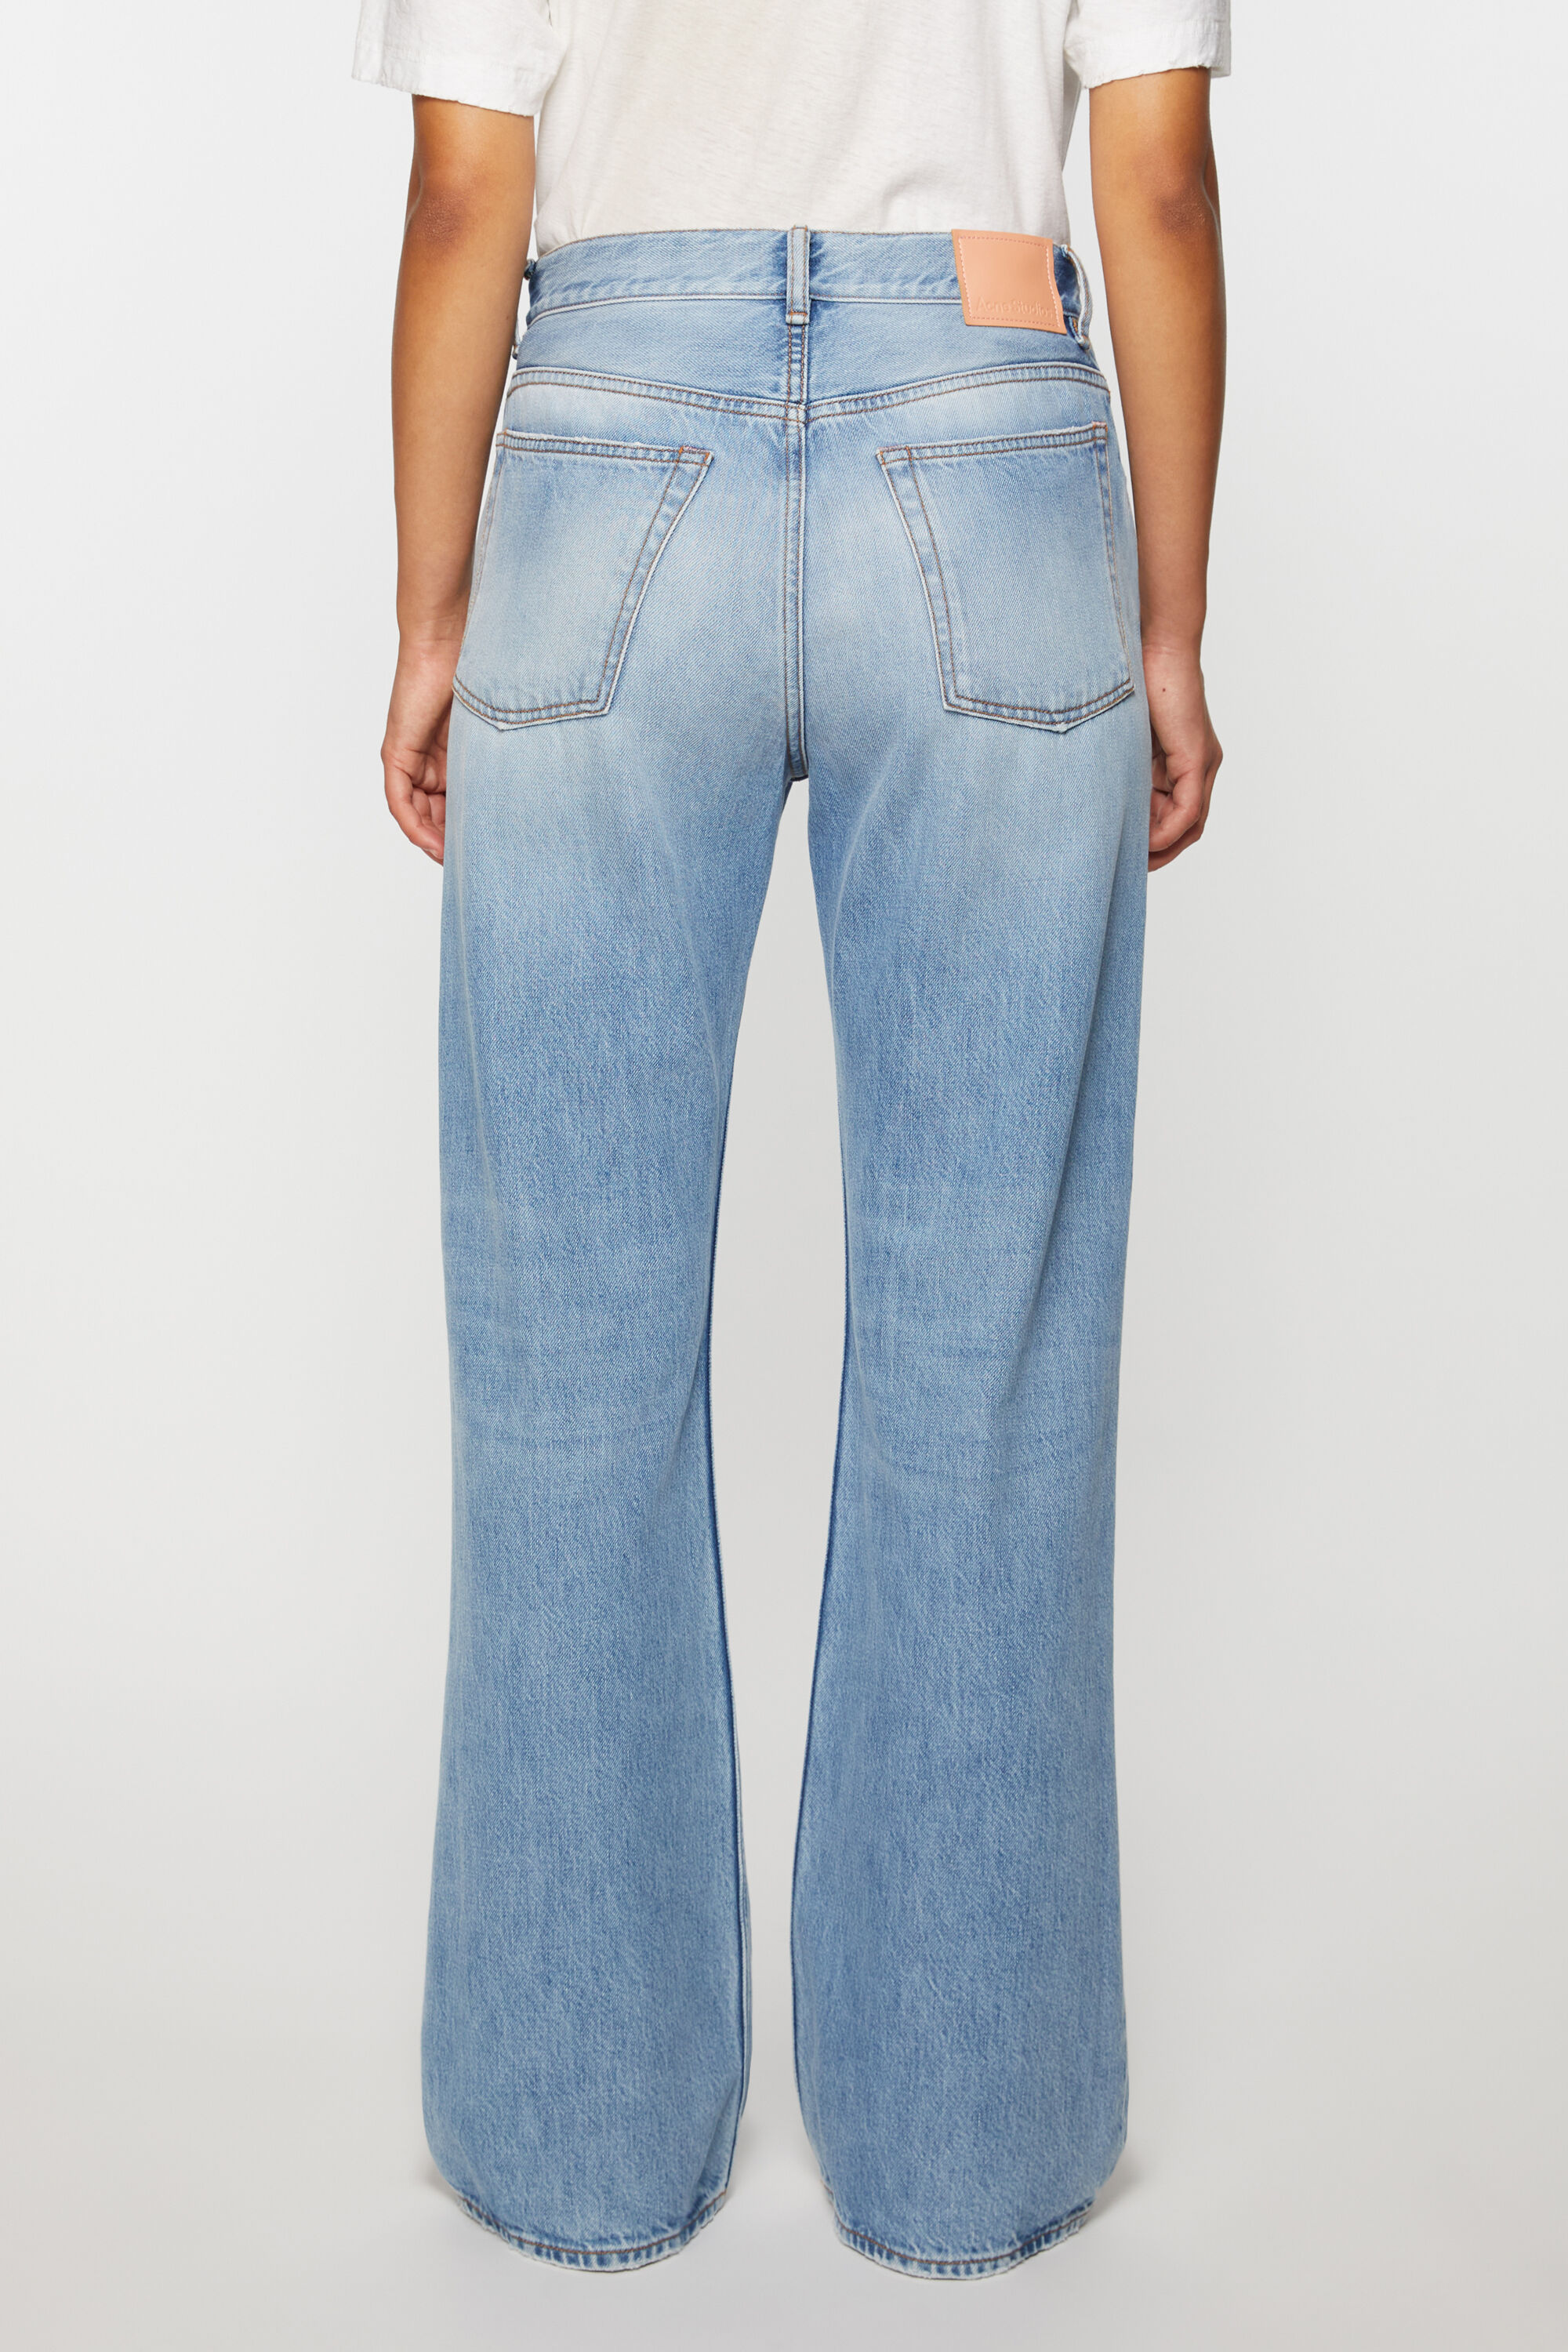 acnestudious flare jeans